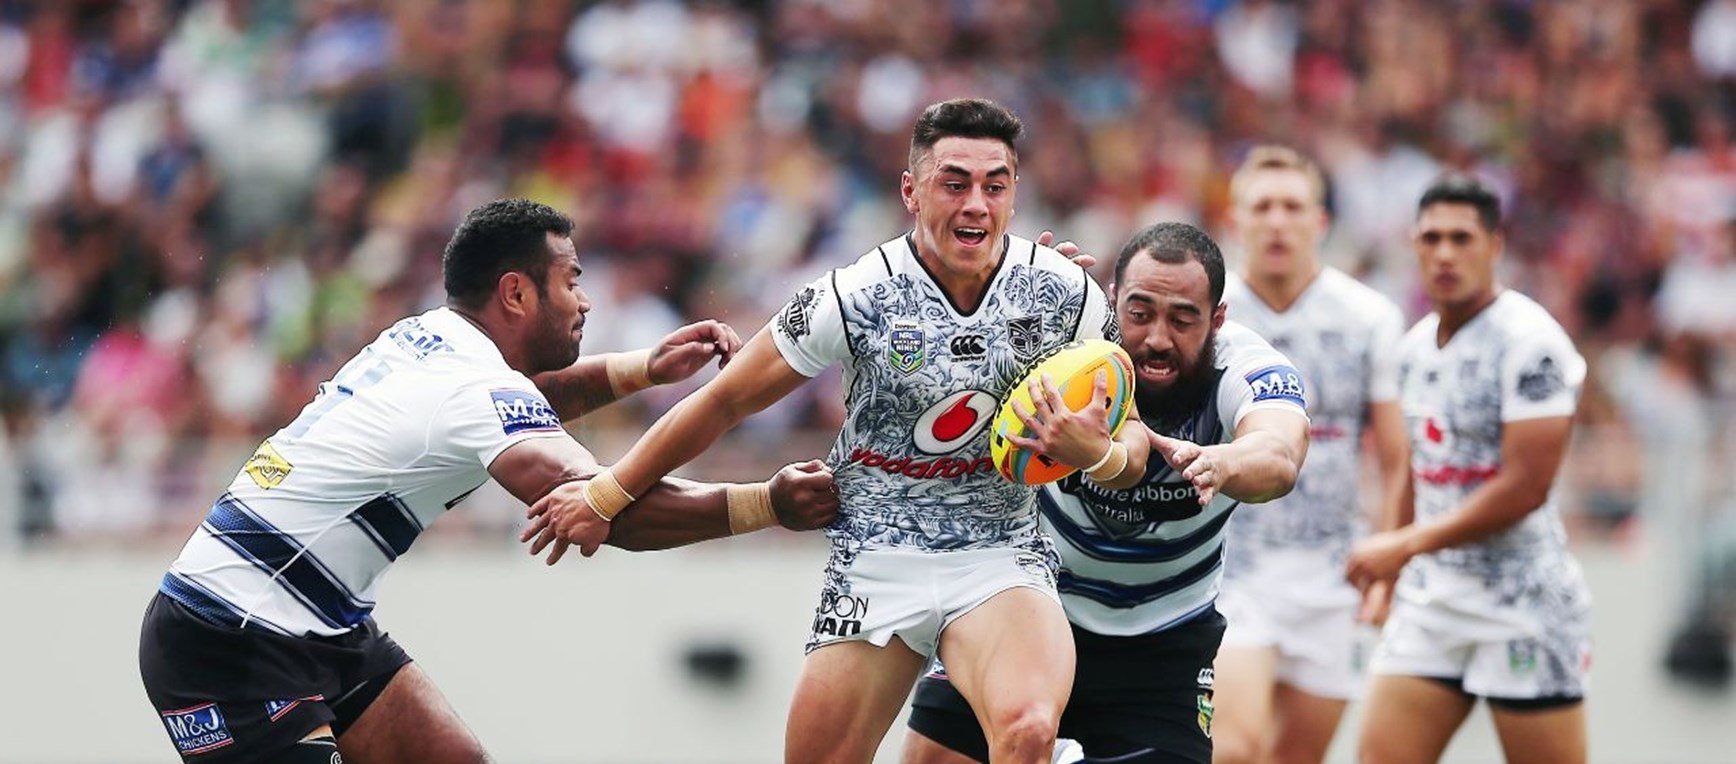 #NRLAKL9s day one in pictures